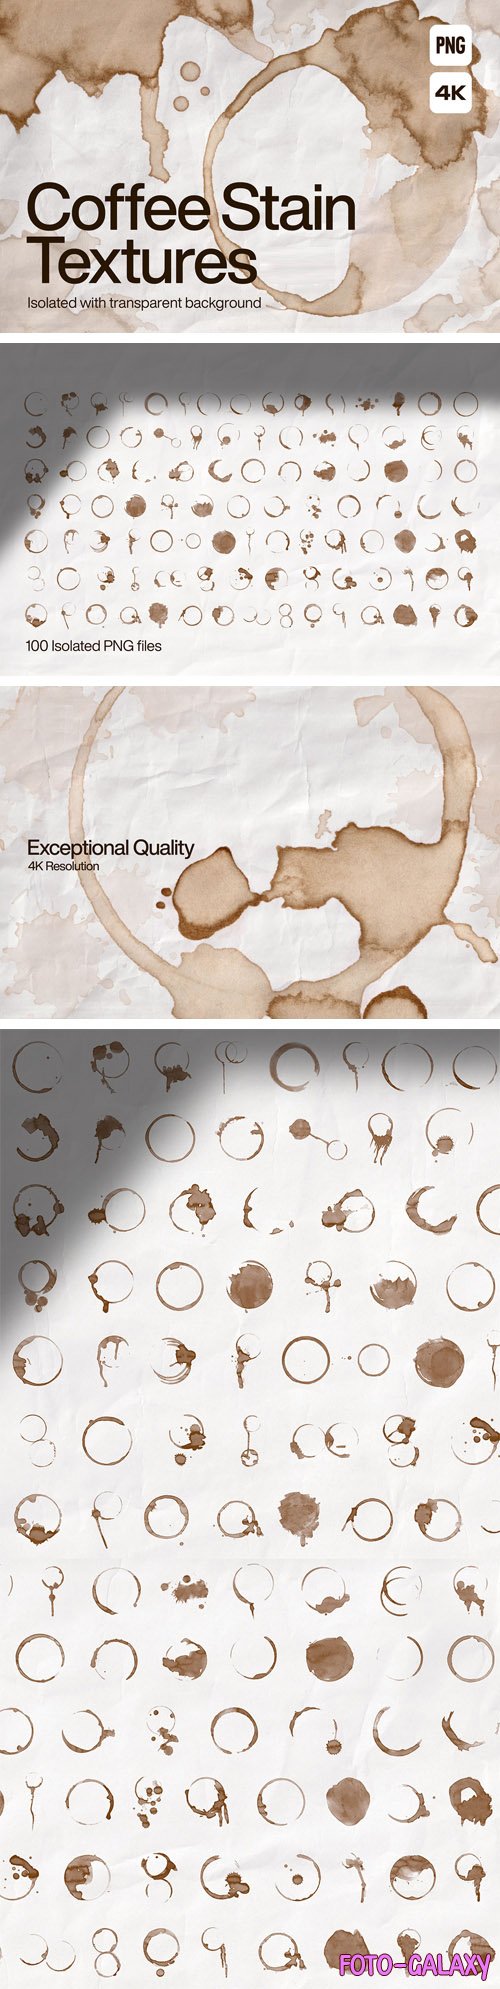 Coffee Stain Textures Collection